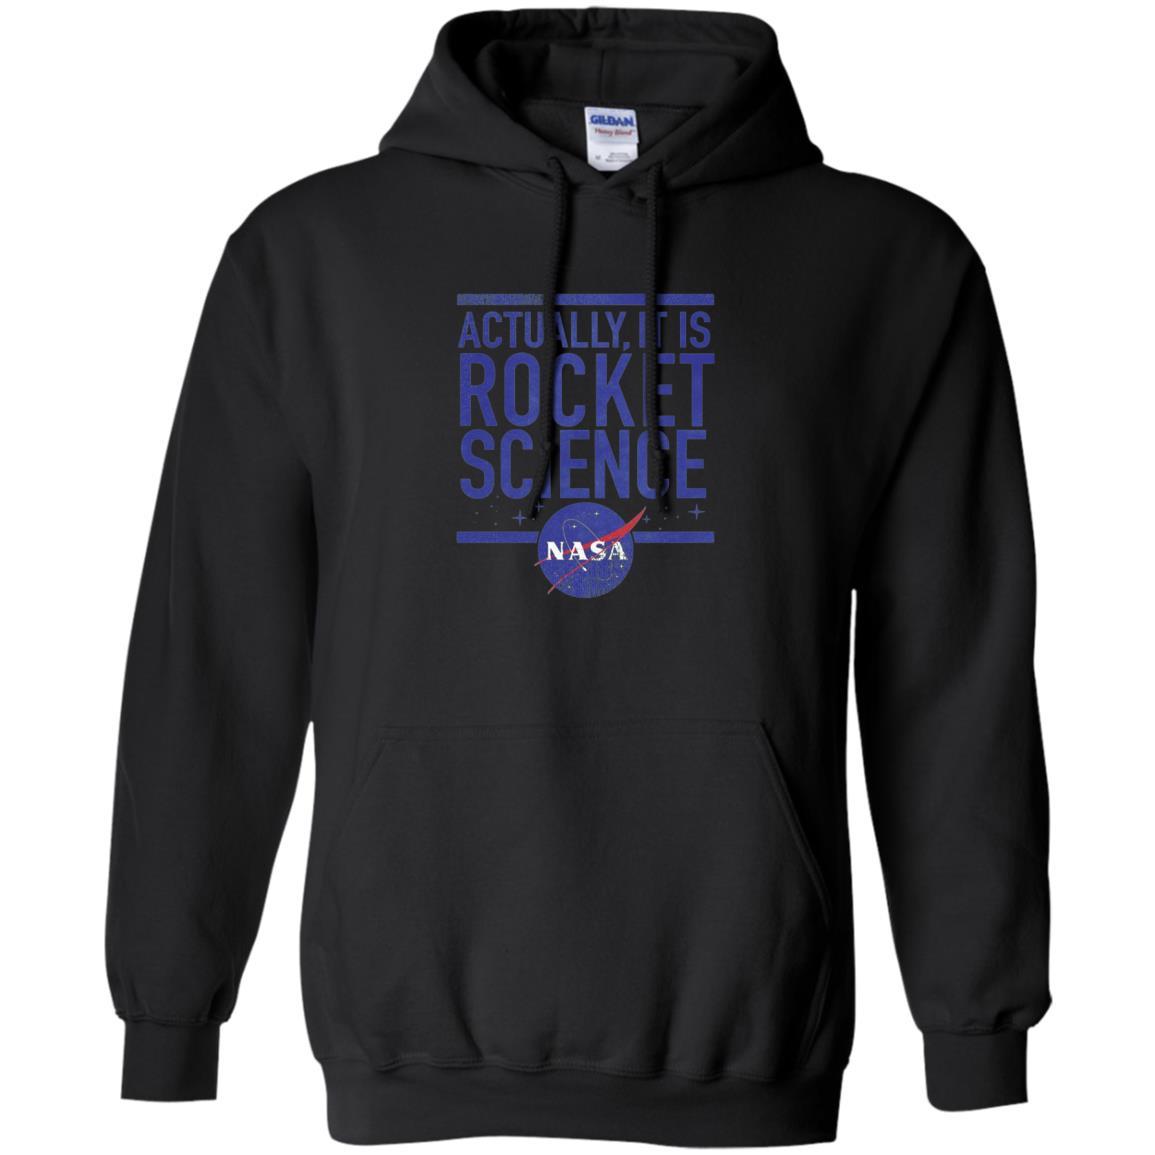 Science T-Shirt Actually It Is Rocket Science Graphic